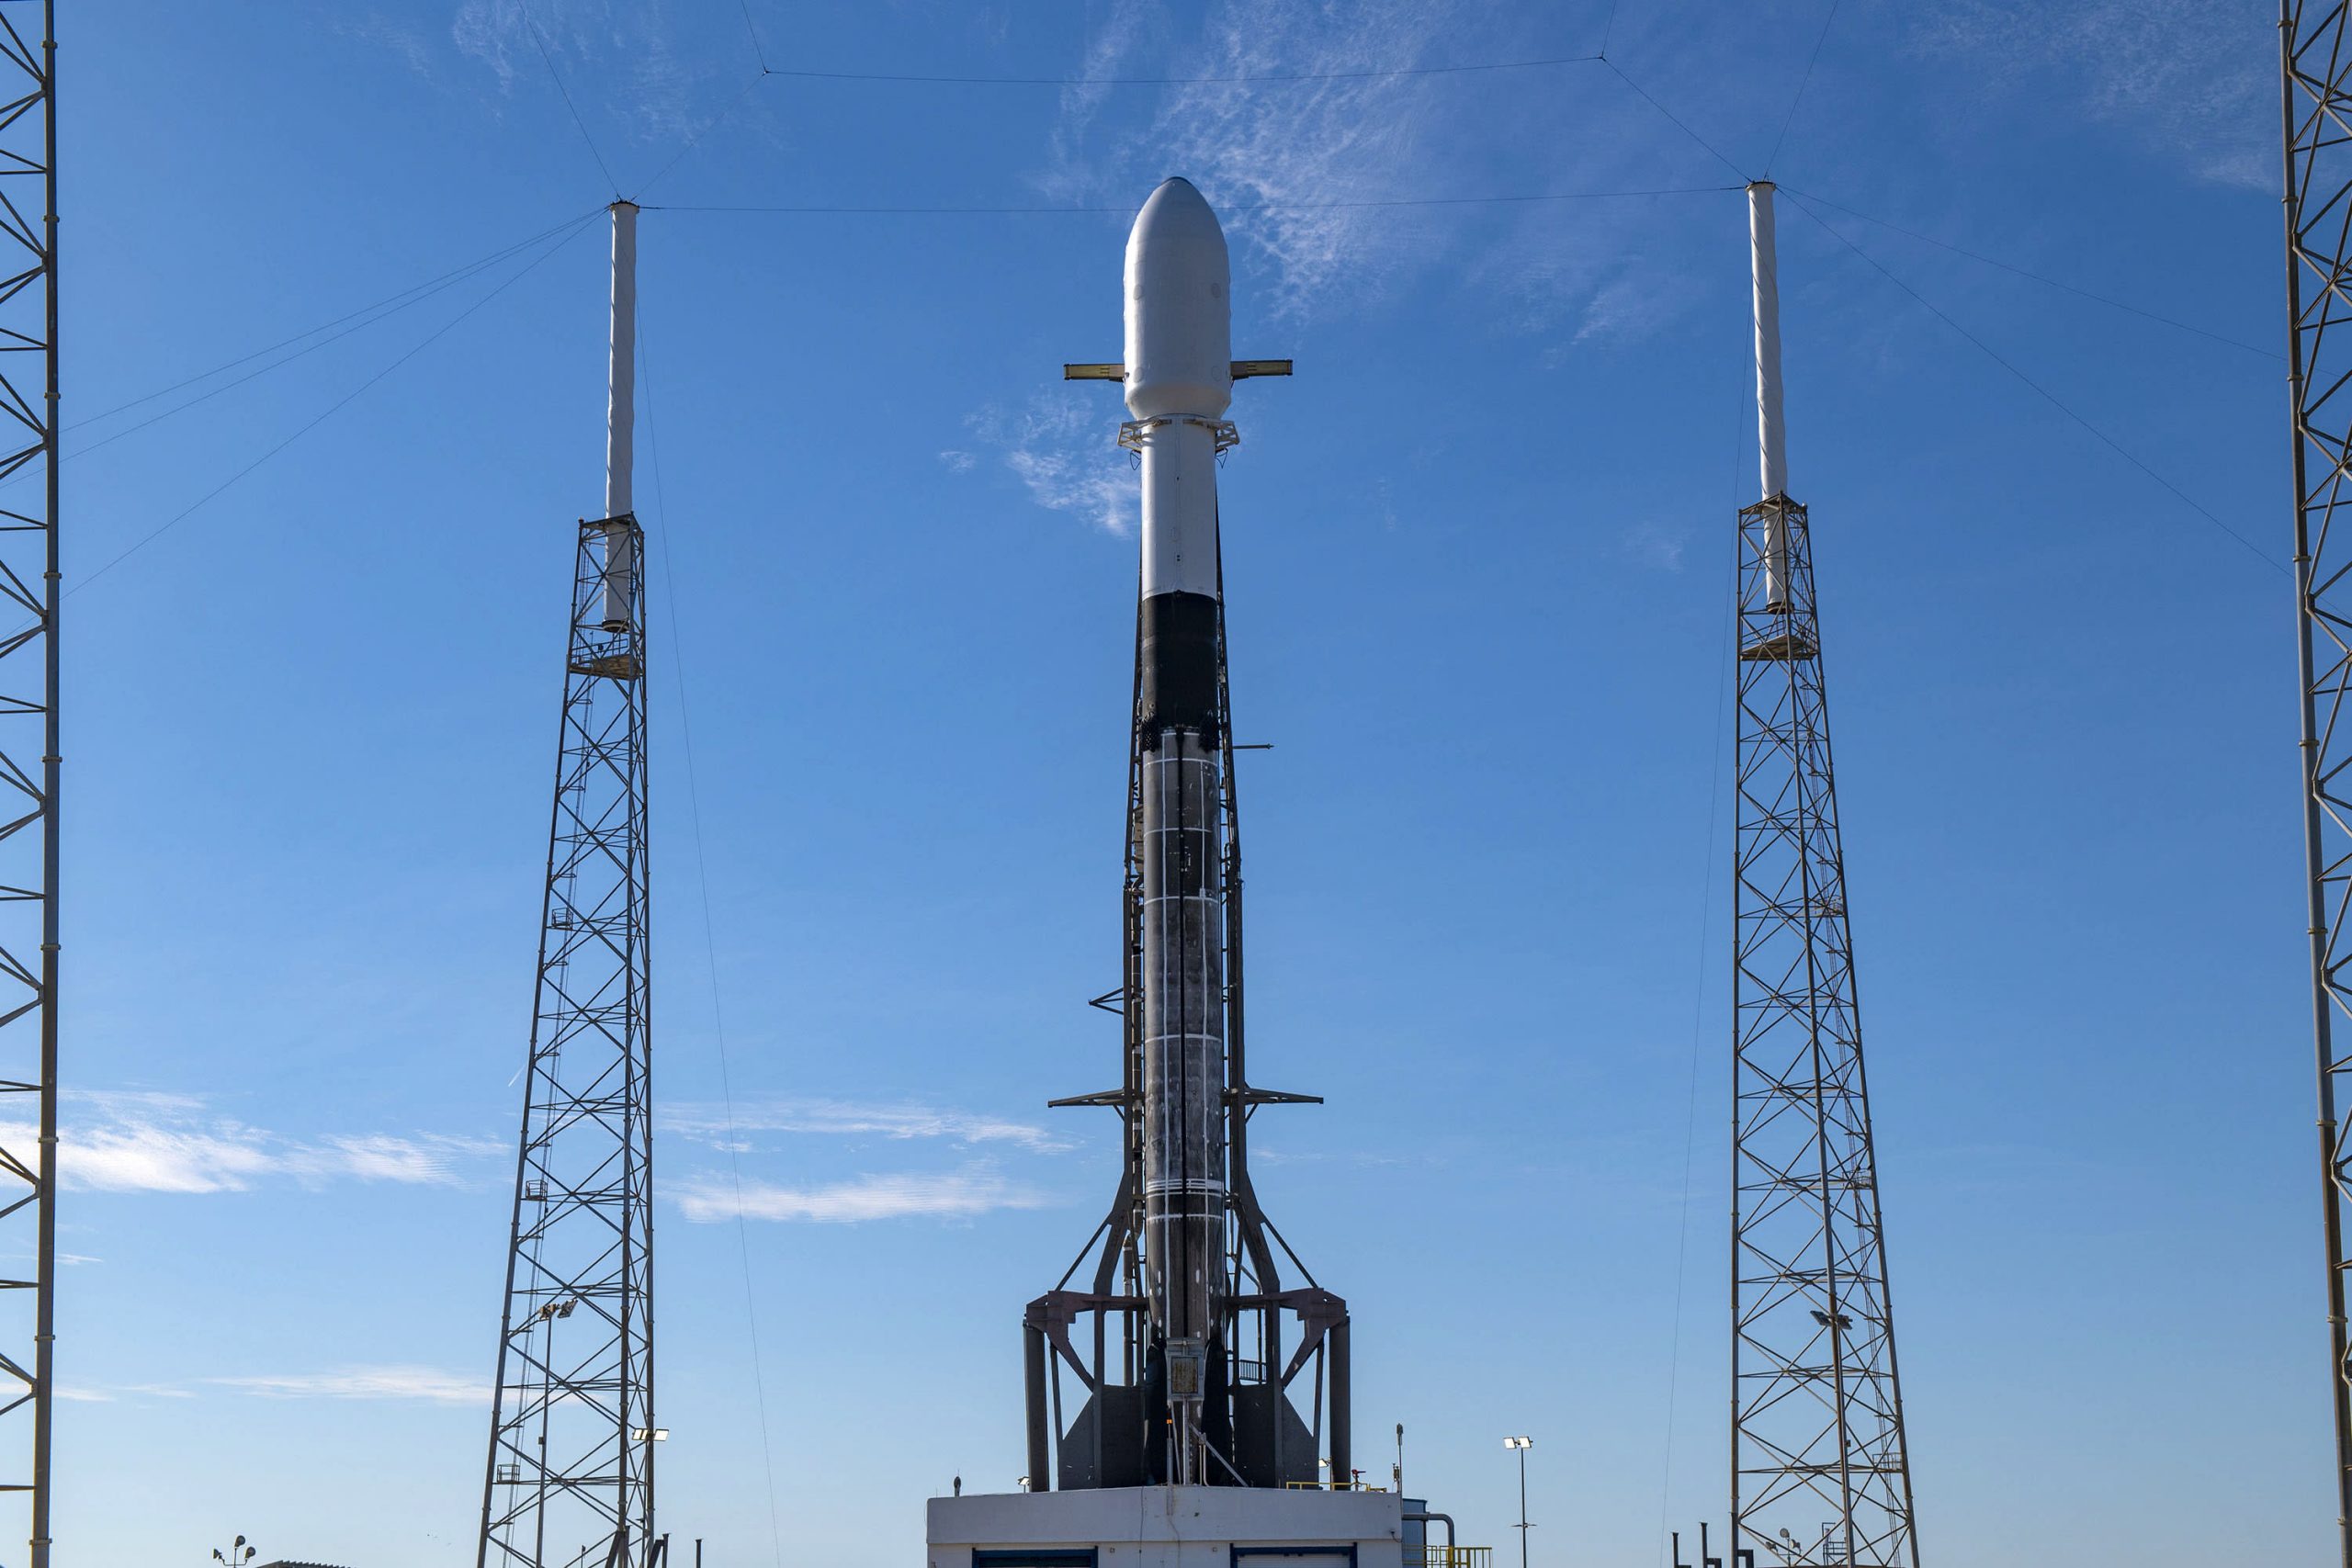 SpaceX Transporter-1 rideshare launch carries 143 spacecraft